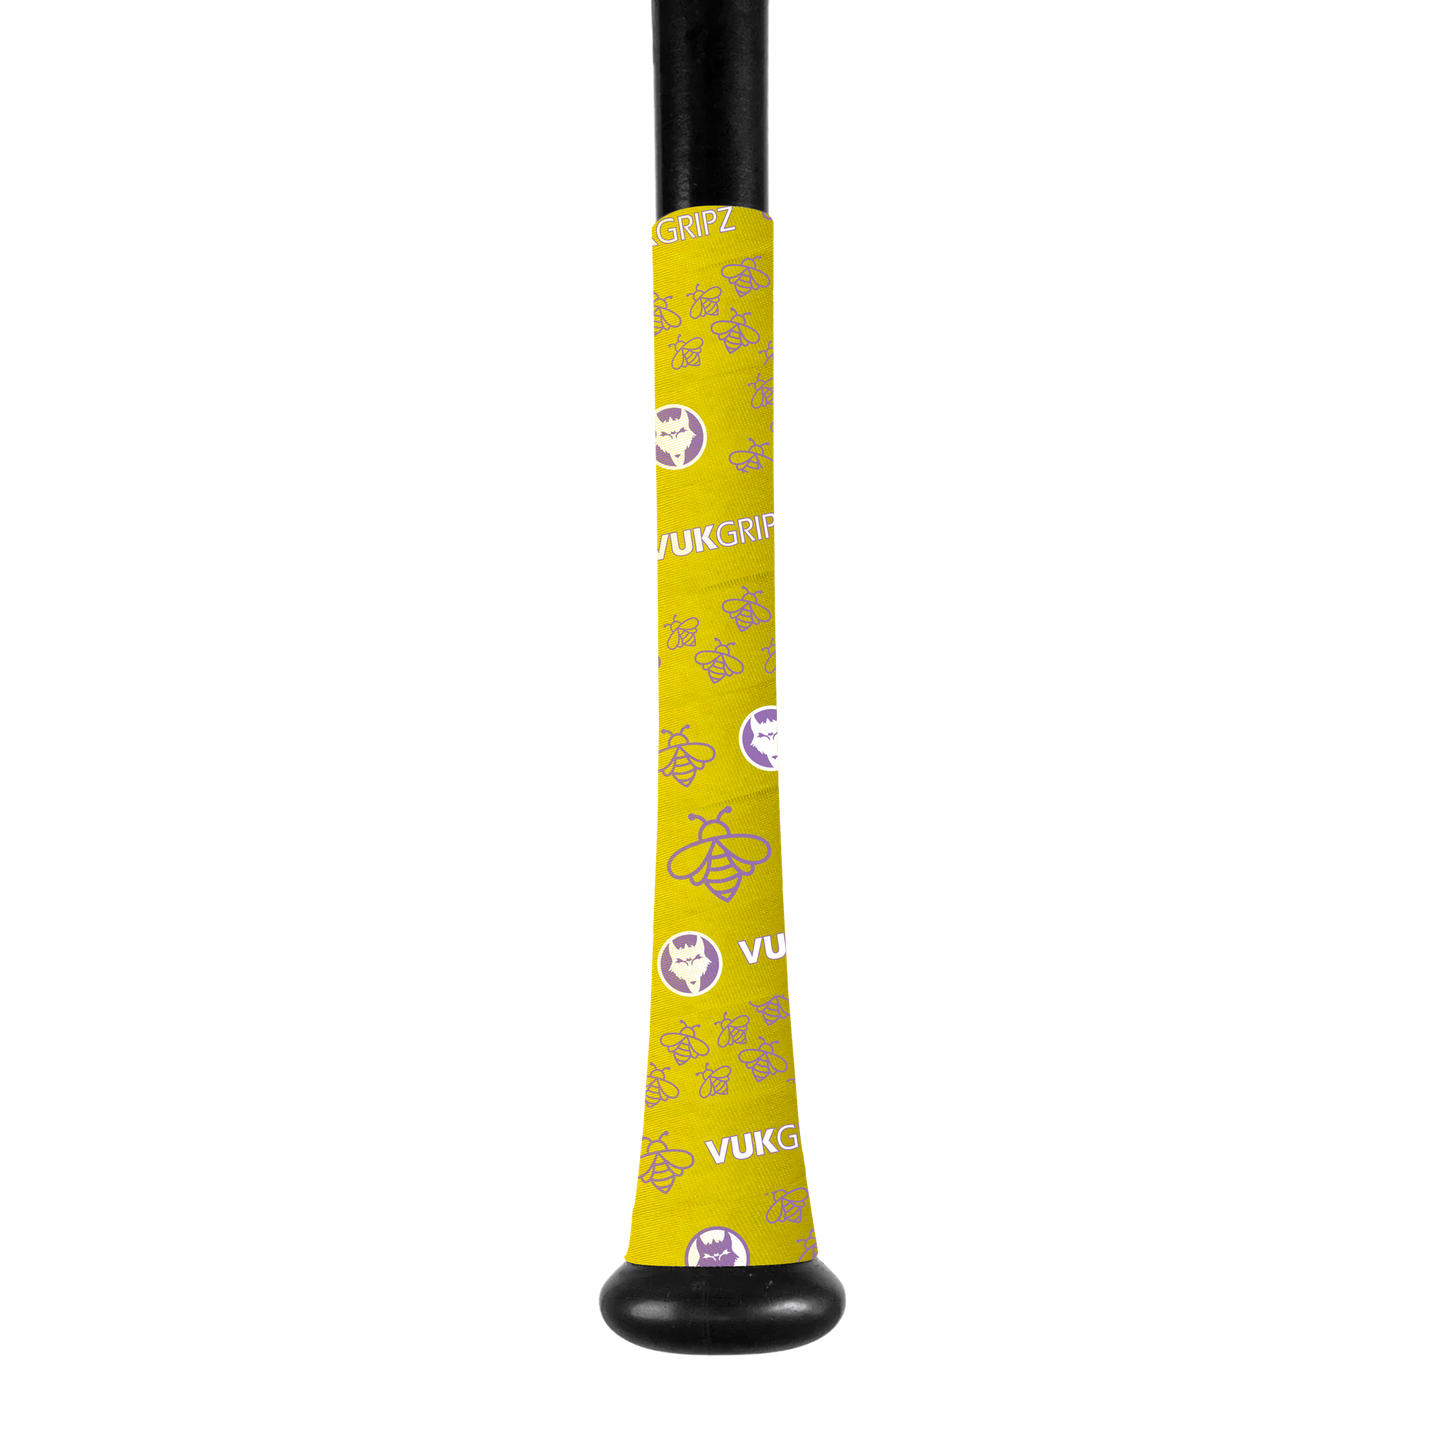 Bumble Bee baseball, bat grip tape for fastpitch